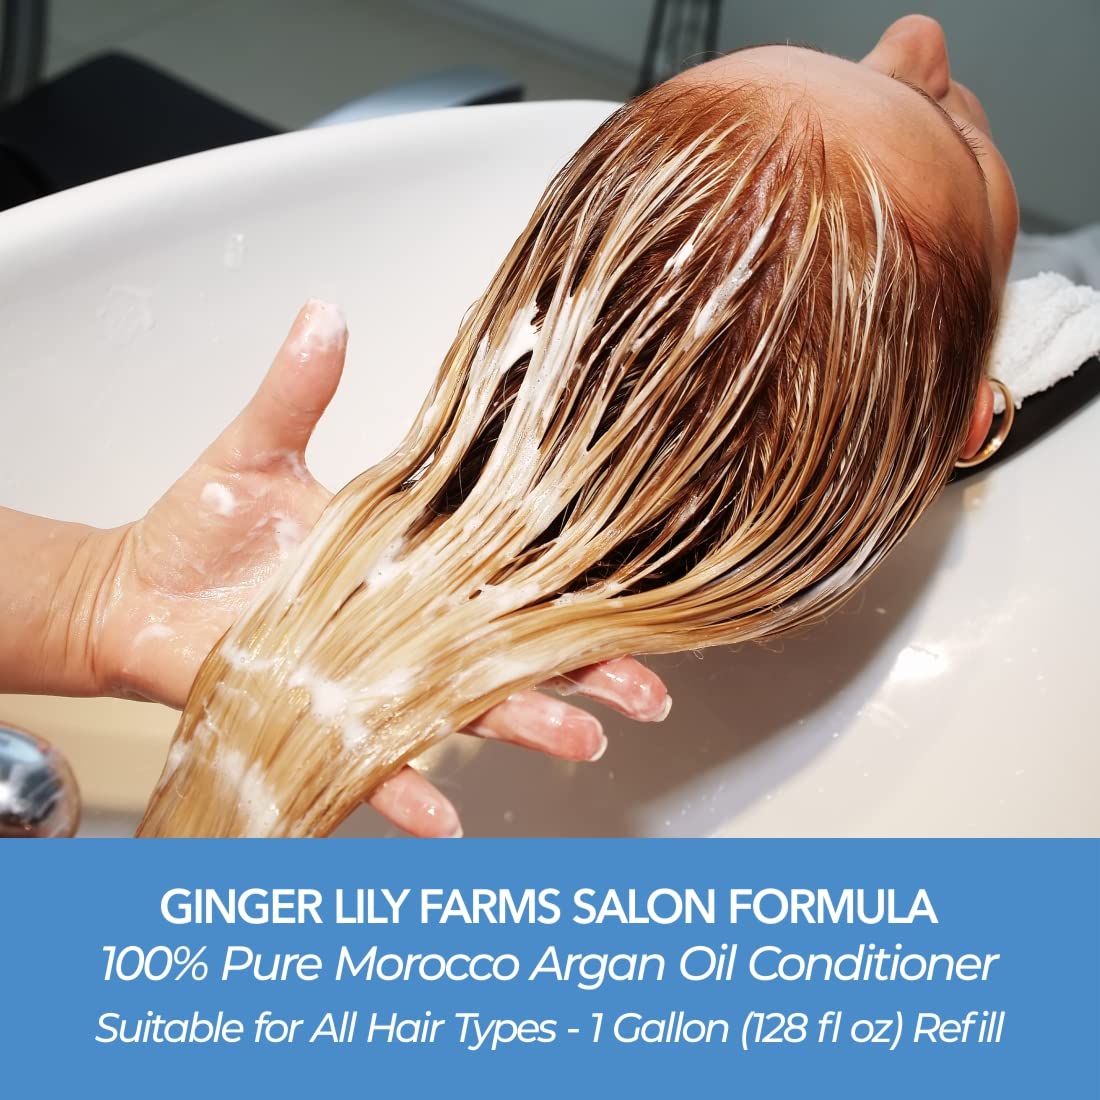 Ginger Lily Farms Salon Formula 100% Pure Morocco Argan Oil Conditioner for All Hair Types, 100% Vegan & Cruelty-Free, 1 Gallon, 128 Fl Oz (Pack of 1) Refill